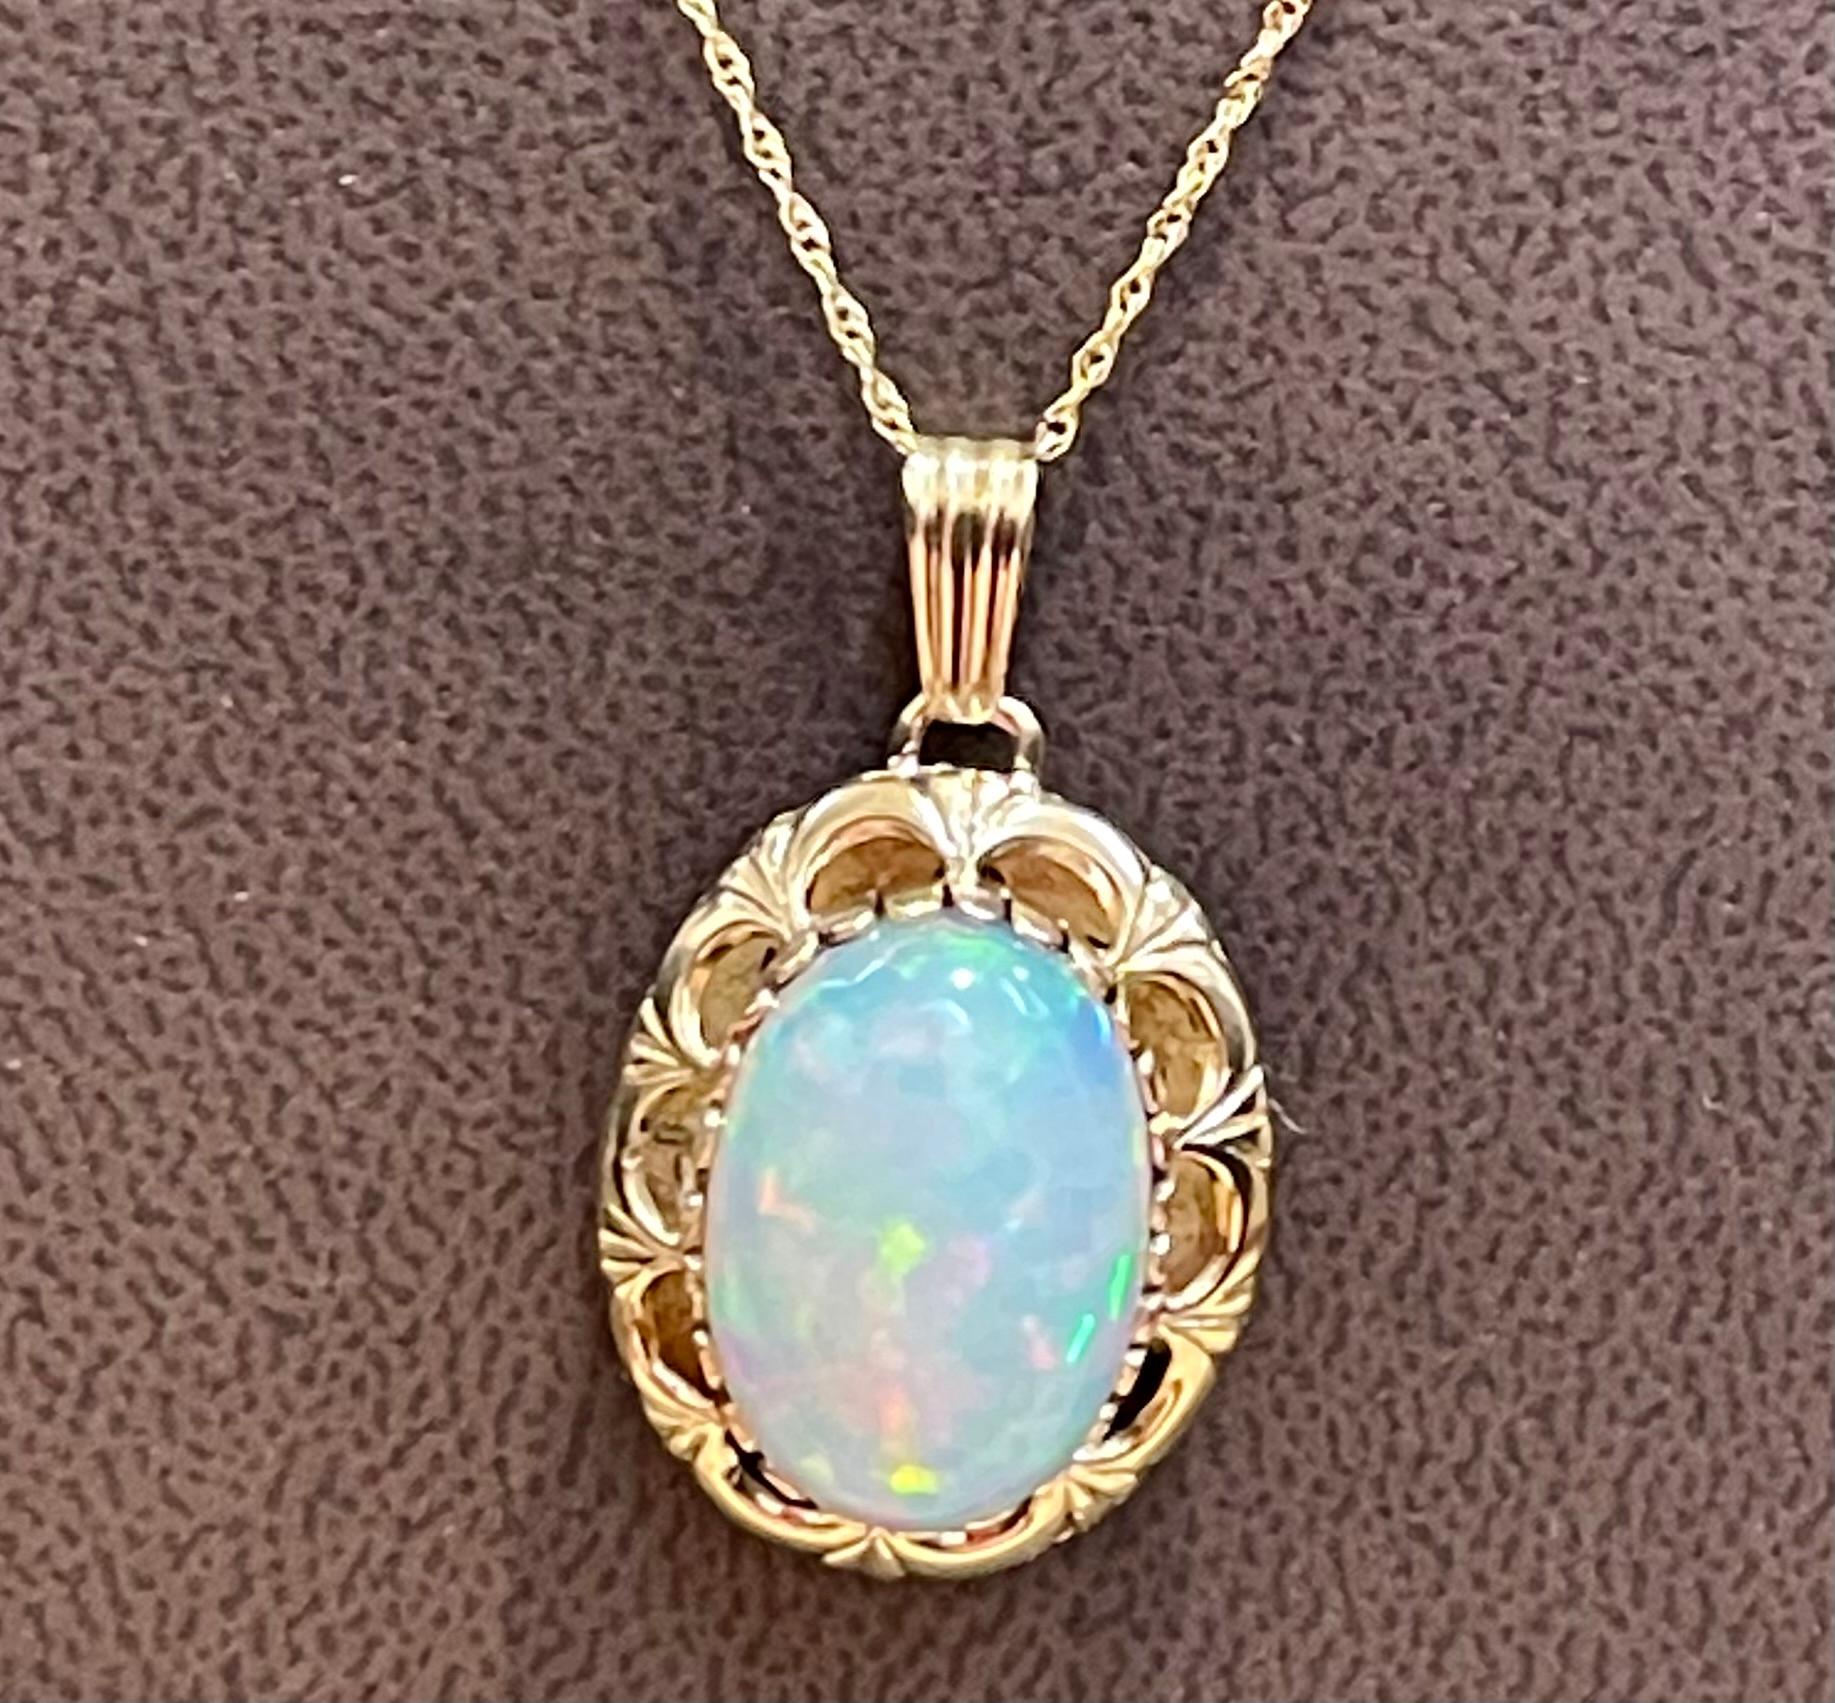 Approximately 8 Carat Oval Ethiopian  Opal Pendant /  Necklace 14 Kt Gold Necklace with Chain
This spectacular Pendant Necklace consisting of a single Oval Shape Ethiopian Opal Approximately 8 Carat. 
14 X 18 mm oval opal
very clean Stone no